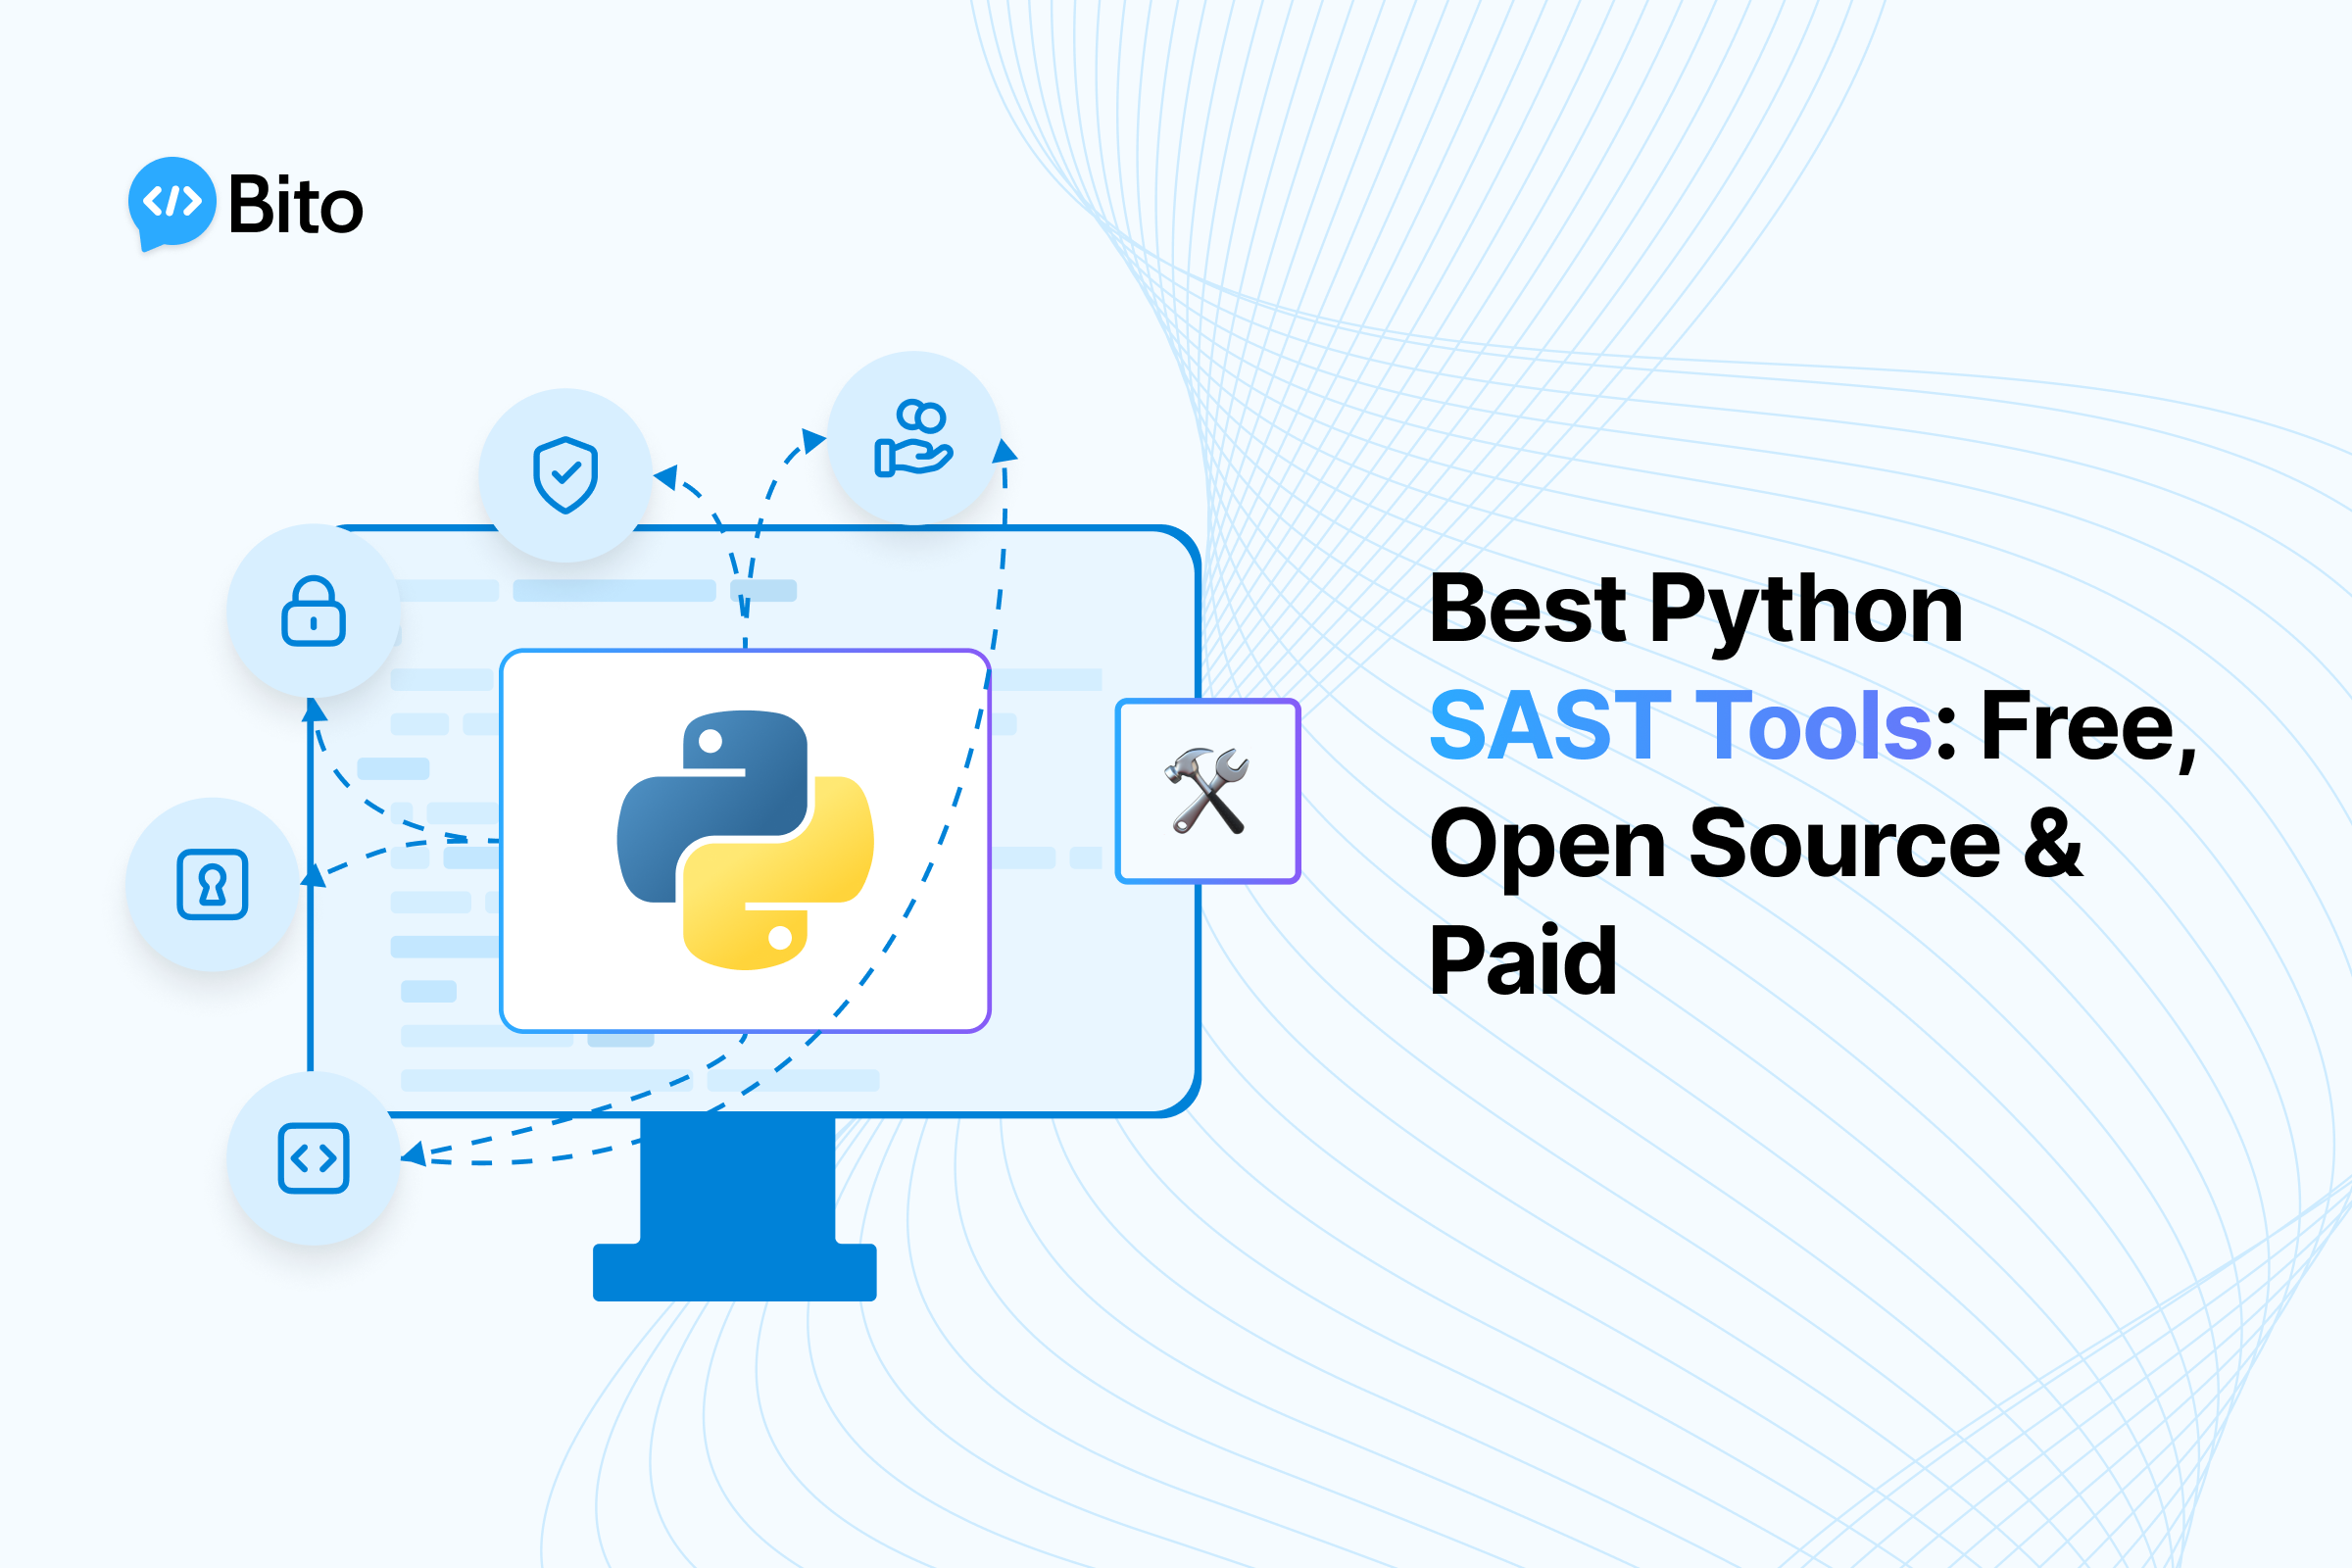 Best Python SAST Tools: Free, Open Source & Paid